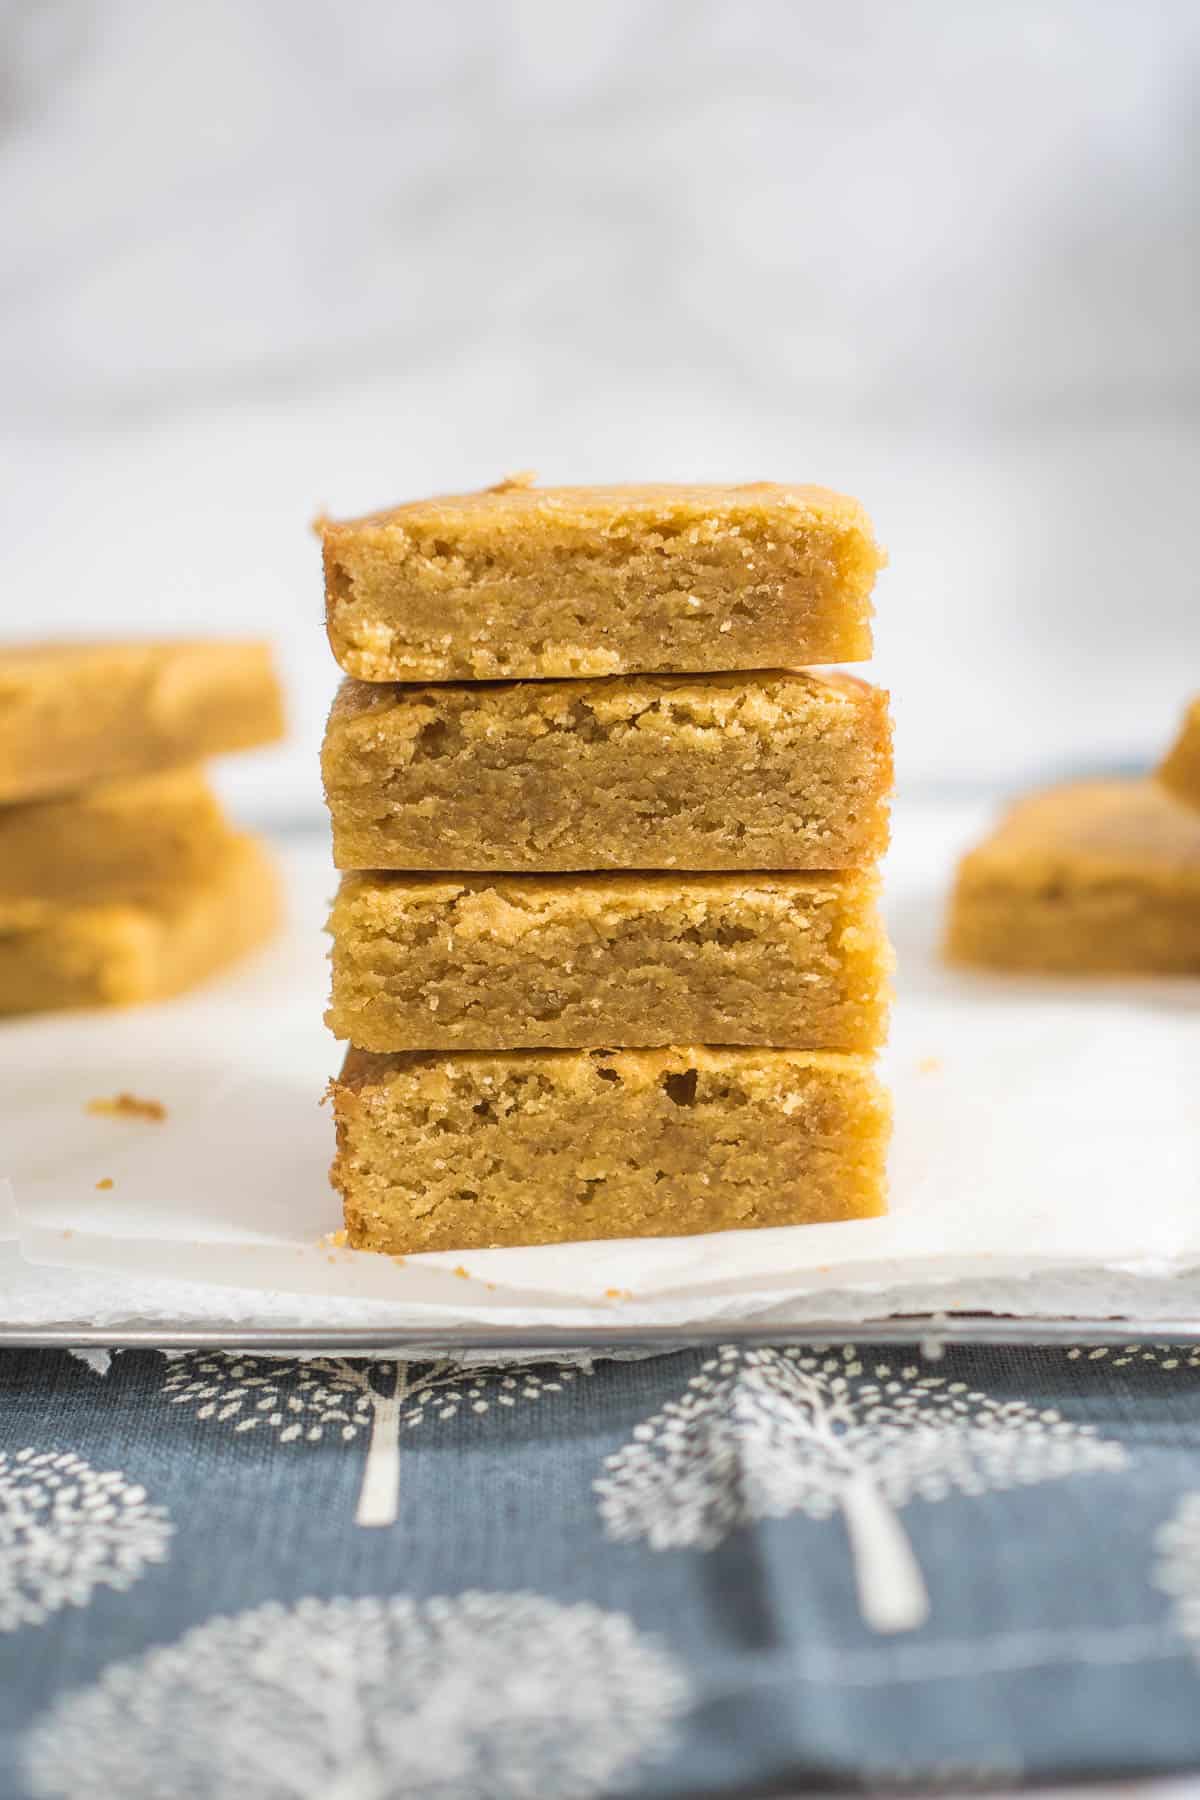 A stack of 4 bars of blondies on a parchment paper.